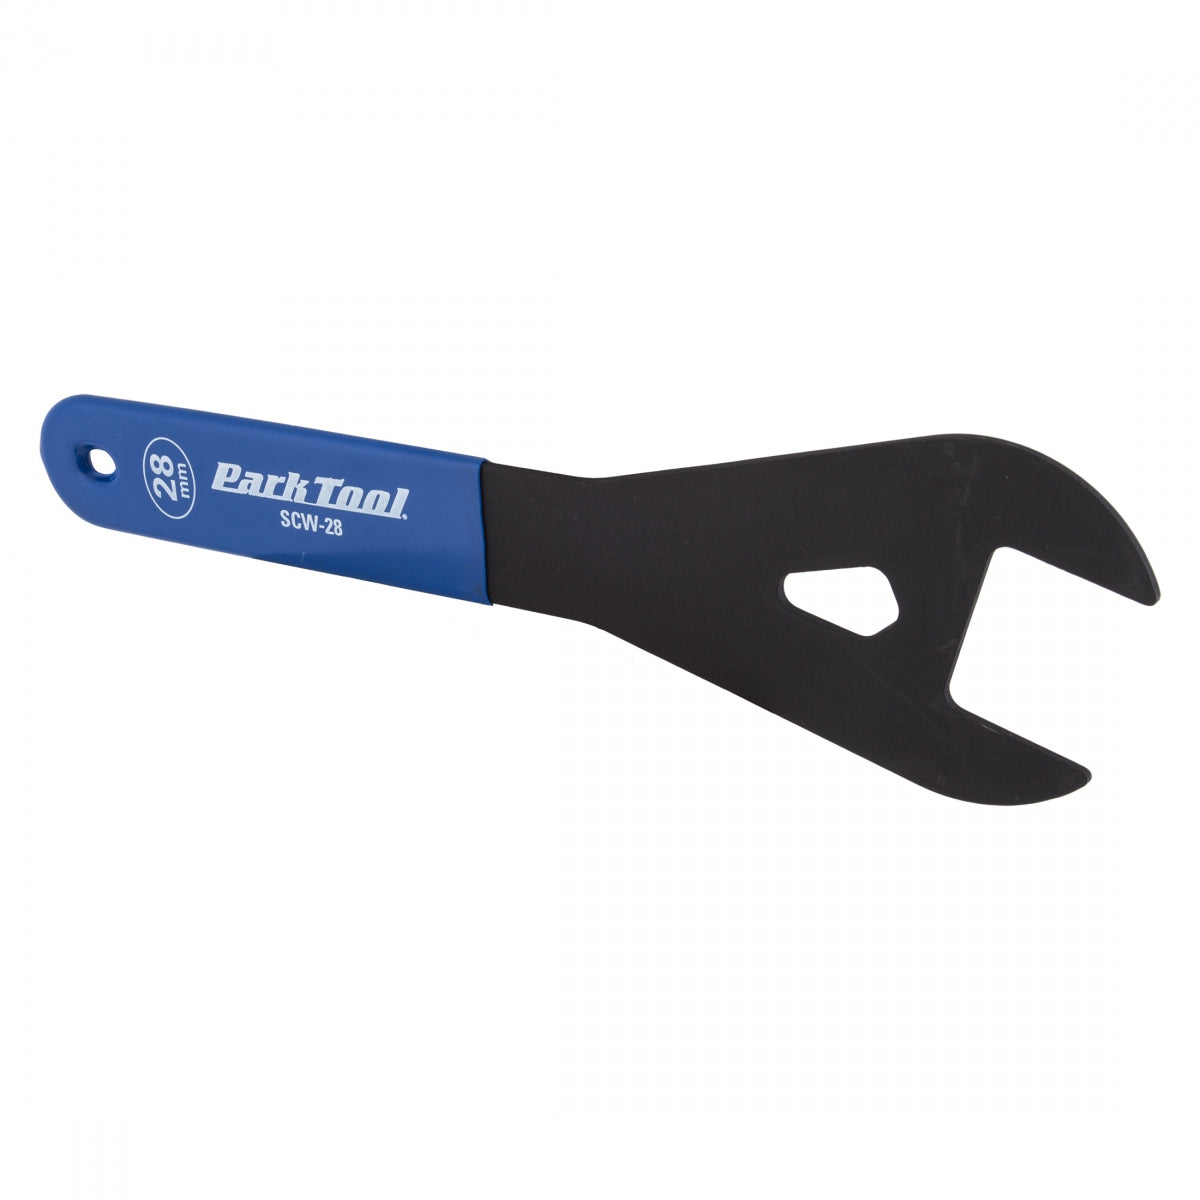 Park Tool #SCW-28 Shop Cone Wrench, 28mm